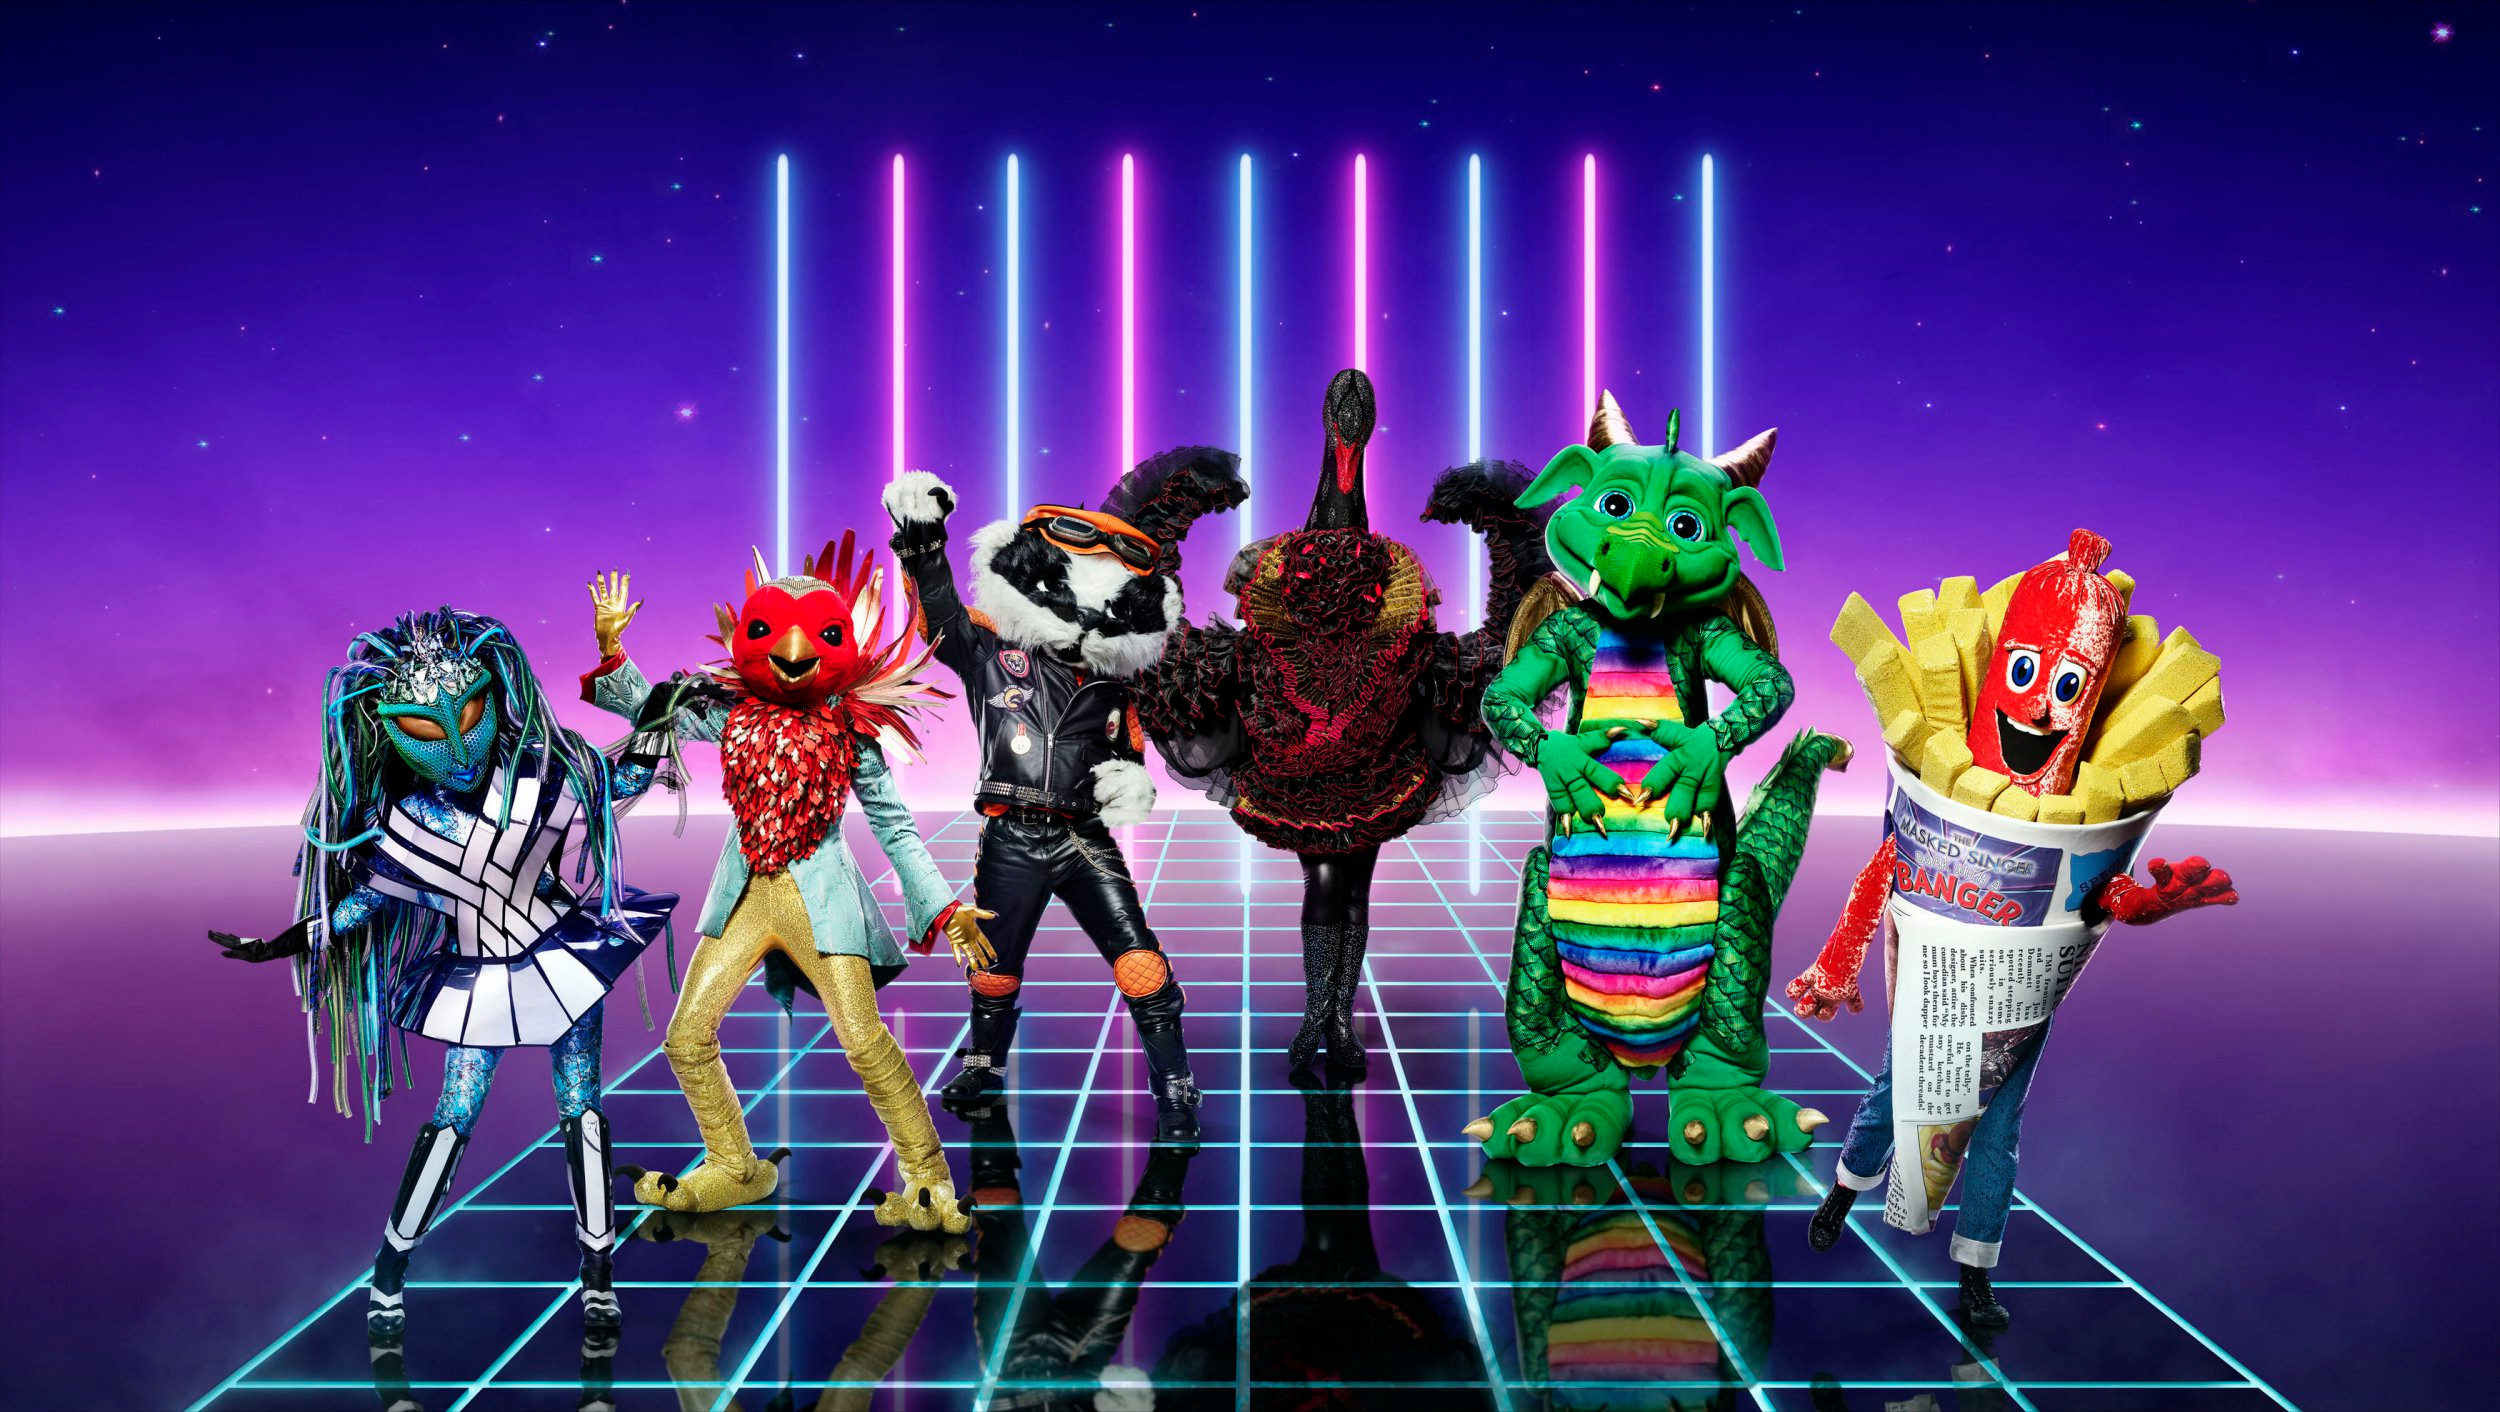 Who won The Masked Singer UK 2020 and what was their costume?